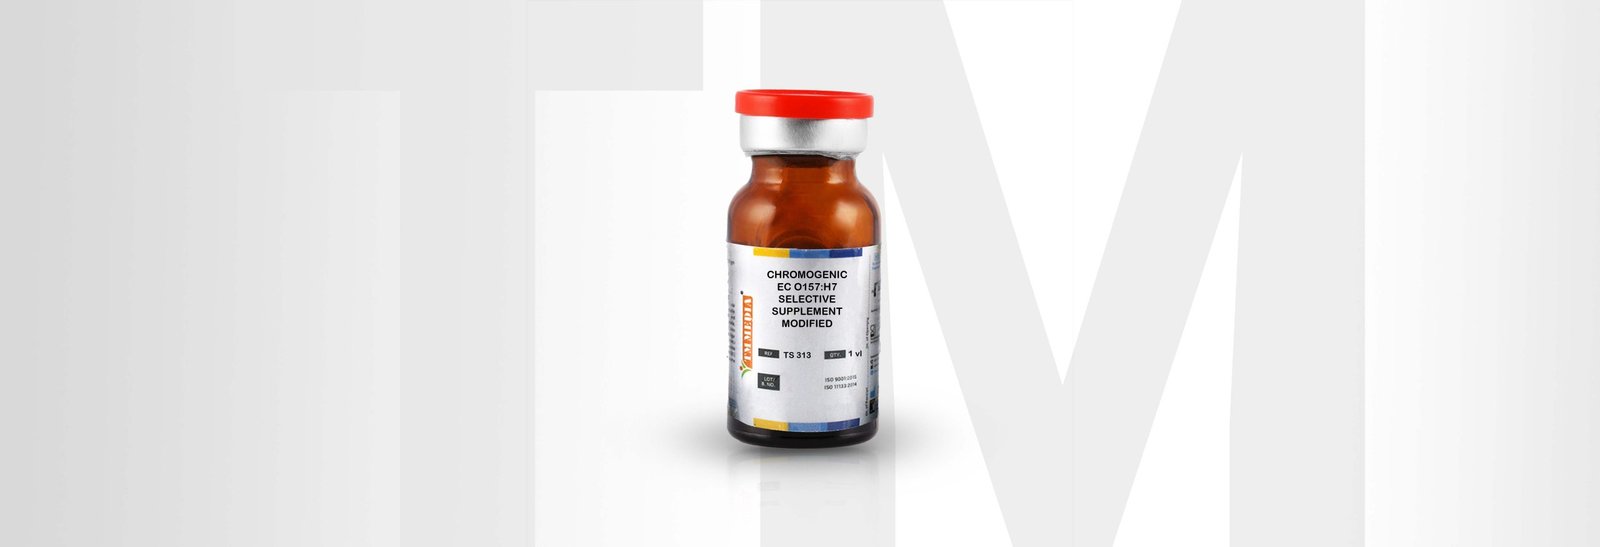 CHROMOGENIC EC O157:H7 SELECTIVE SUPPLEMENT, MODIFIED * New OFFERED BY TM MEDIA